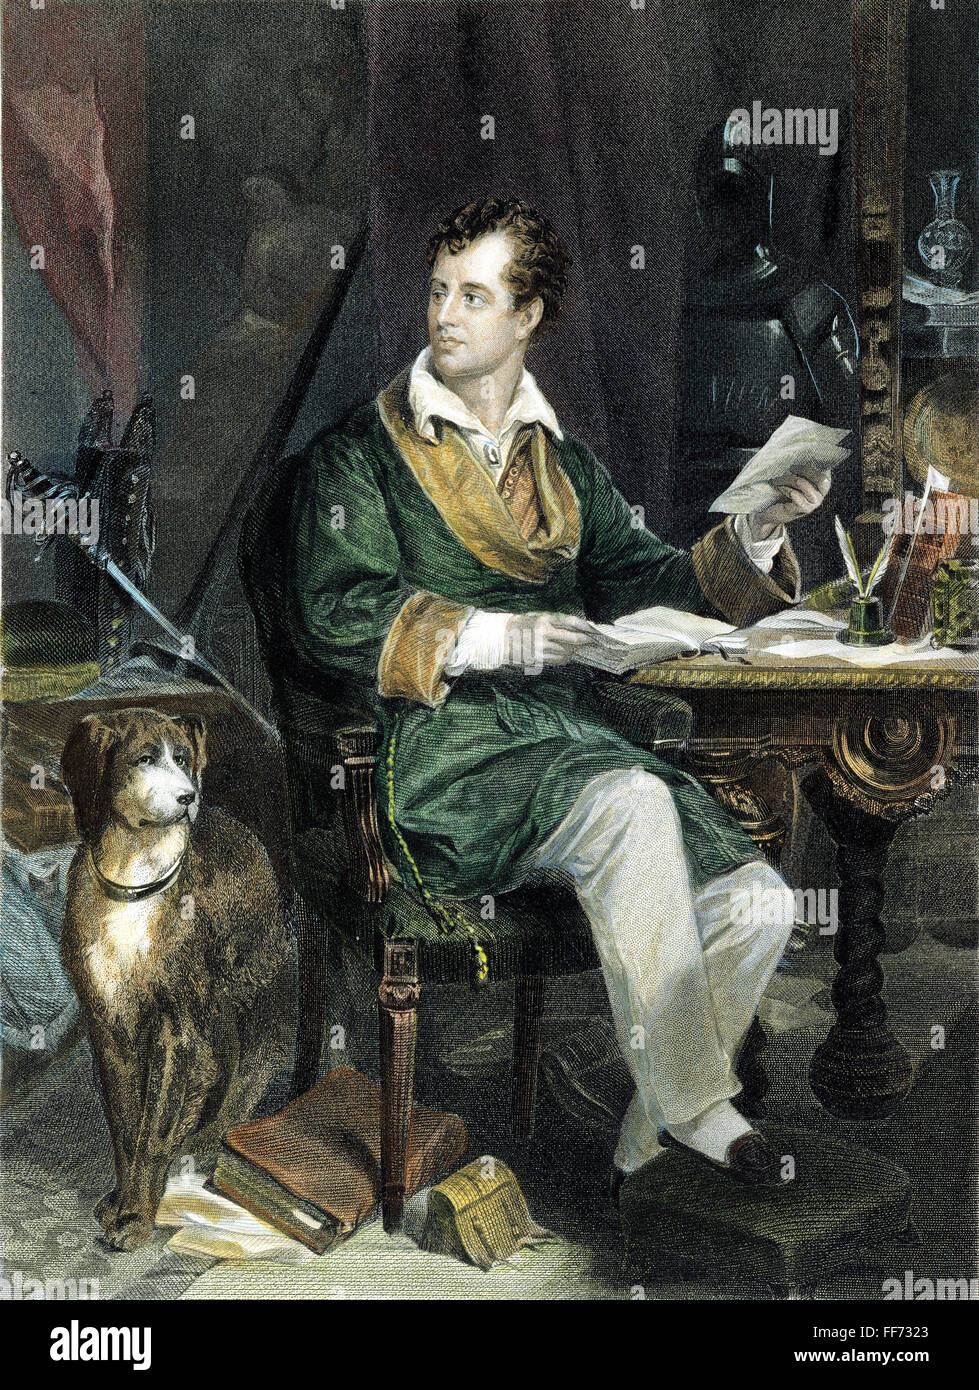 GEORGE GORDON BYRON /n(1788-1824). Sixth Baron Byron. English poet. Steel engraving, American, 1867, after a painting by Alonzo Chappel. Stock Photo